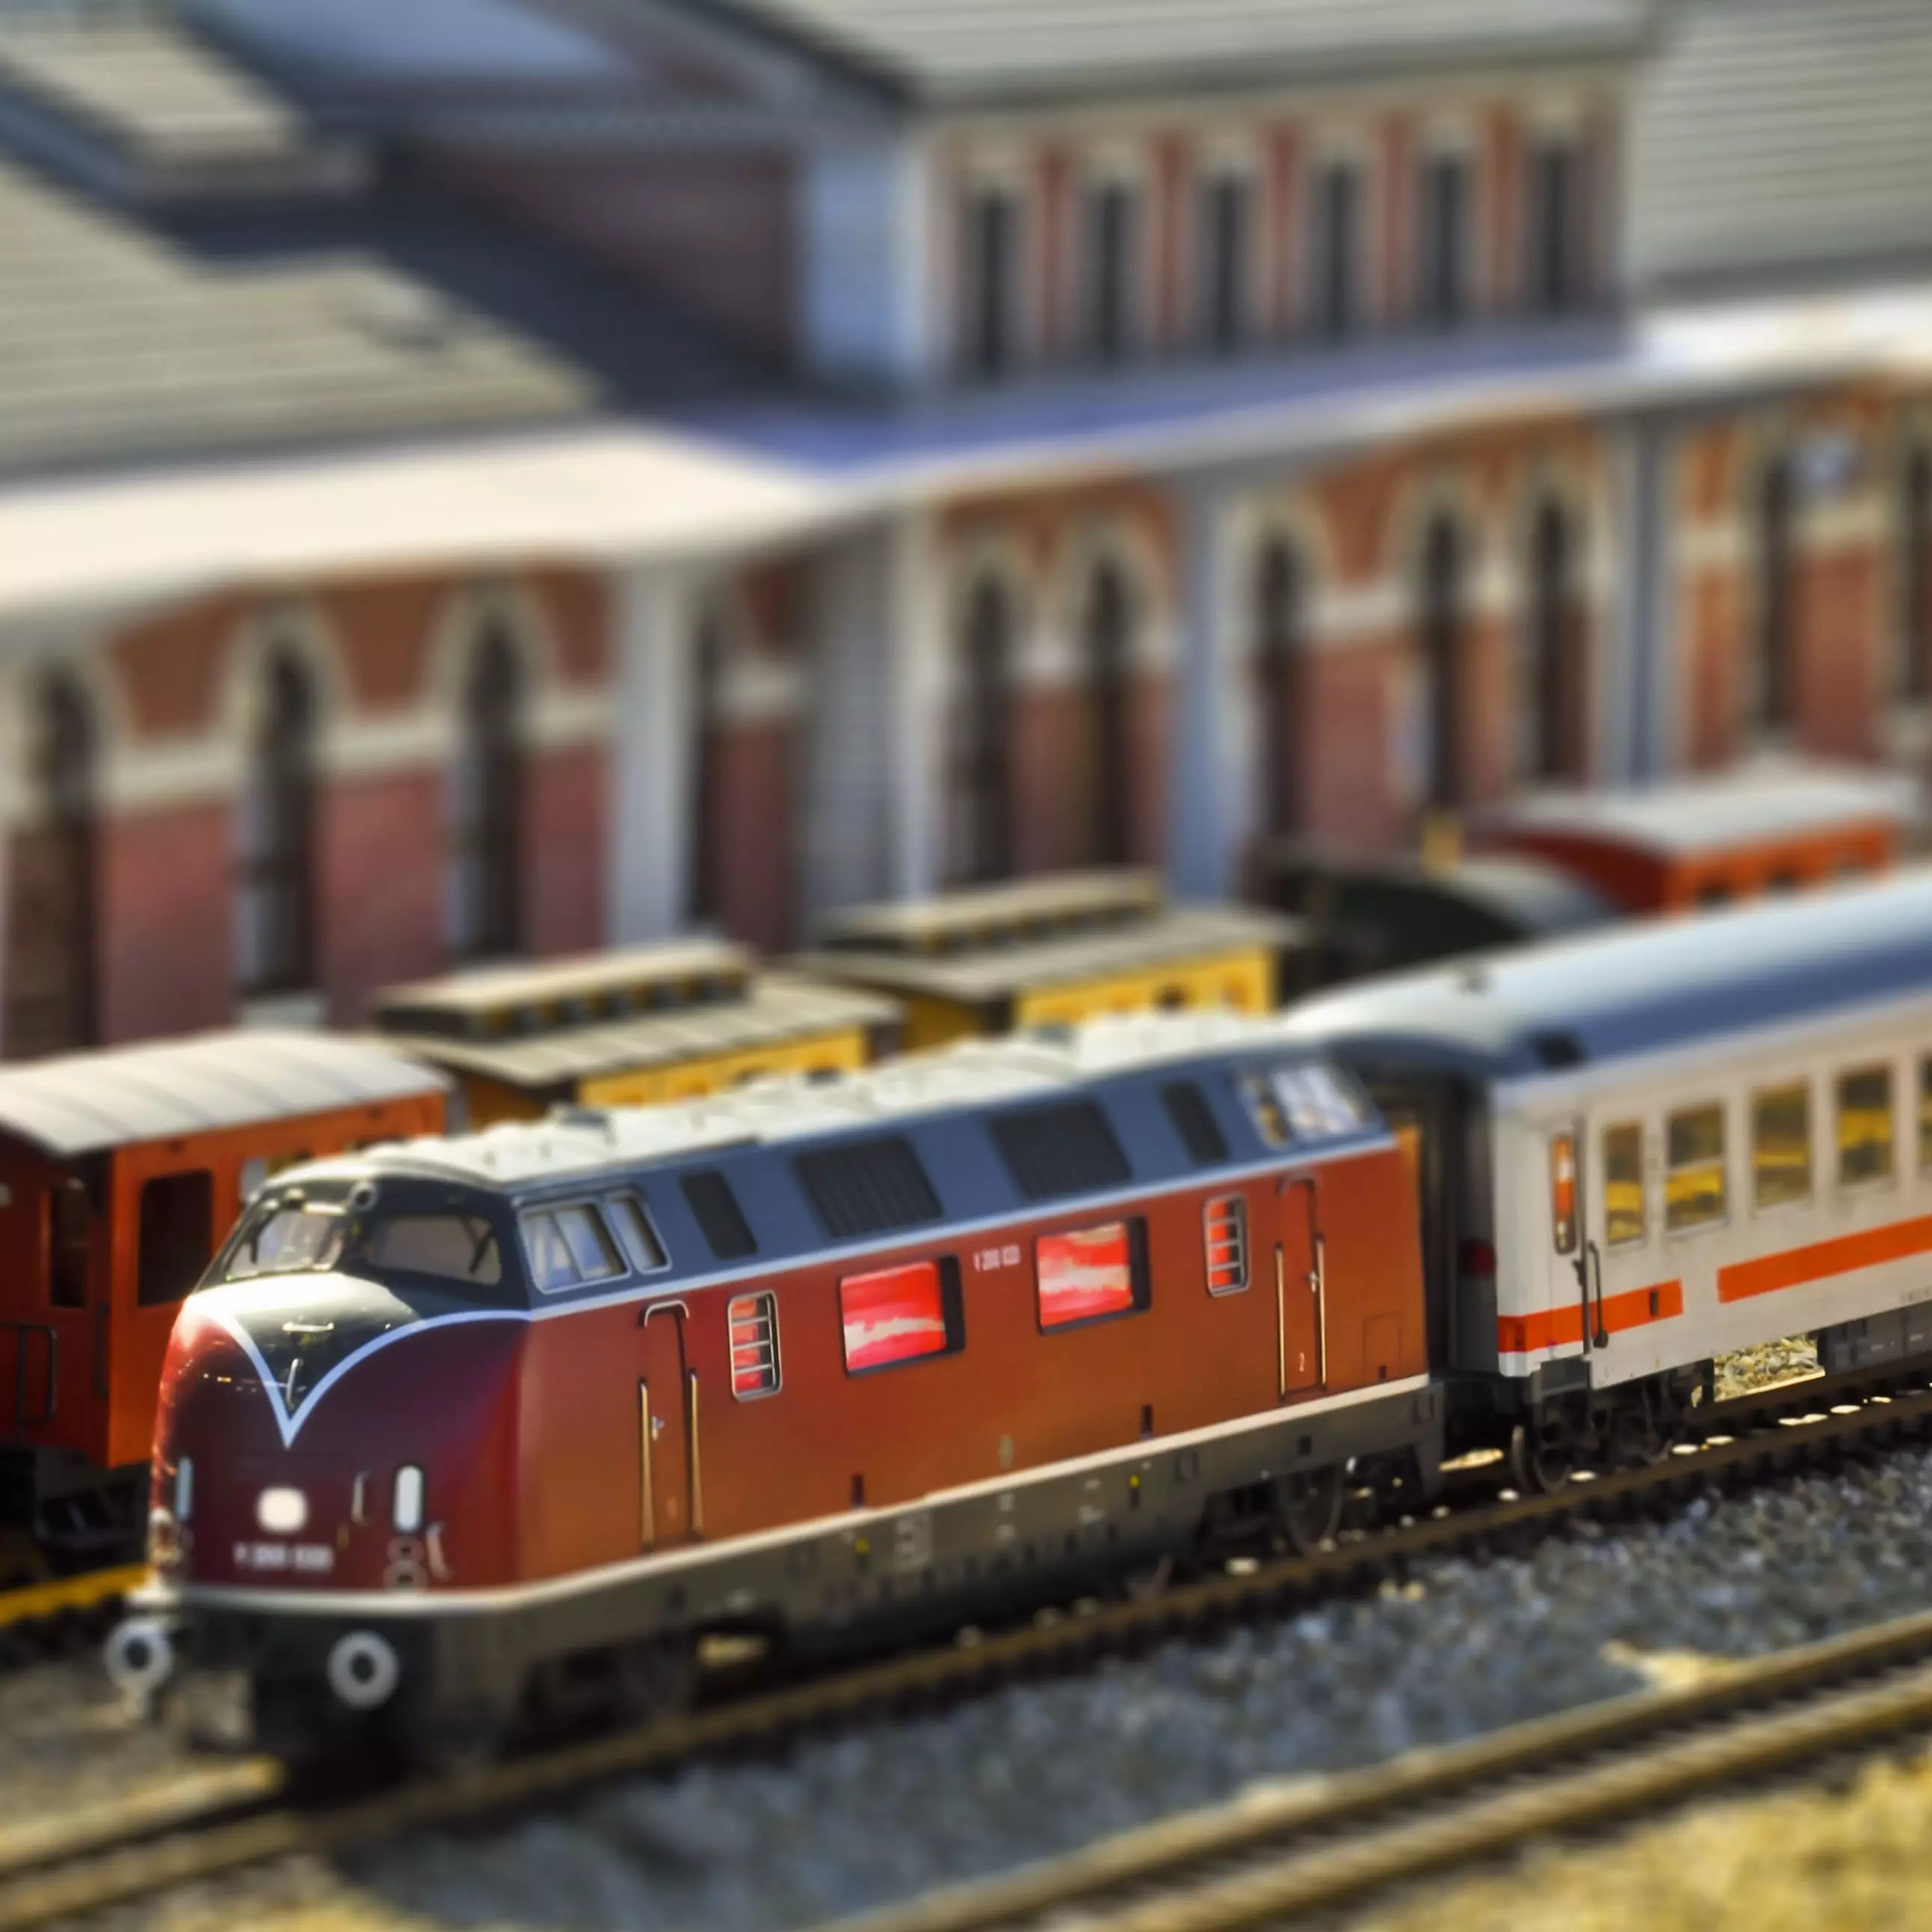 Close up of model trains on a track